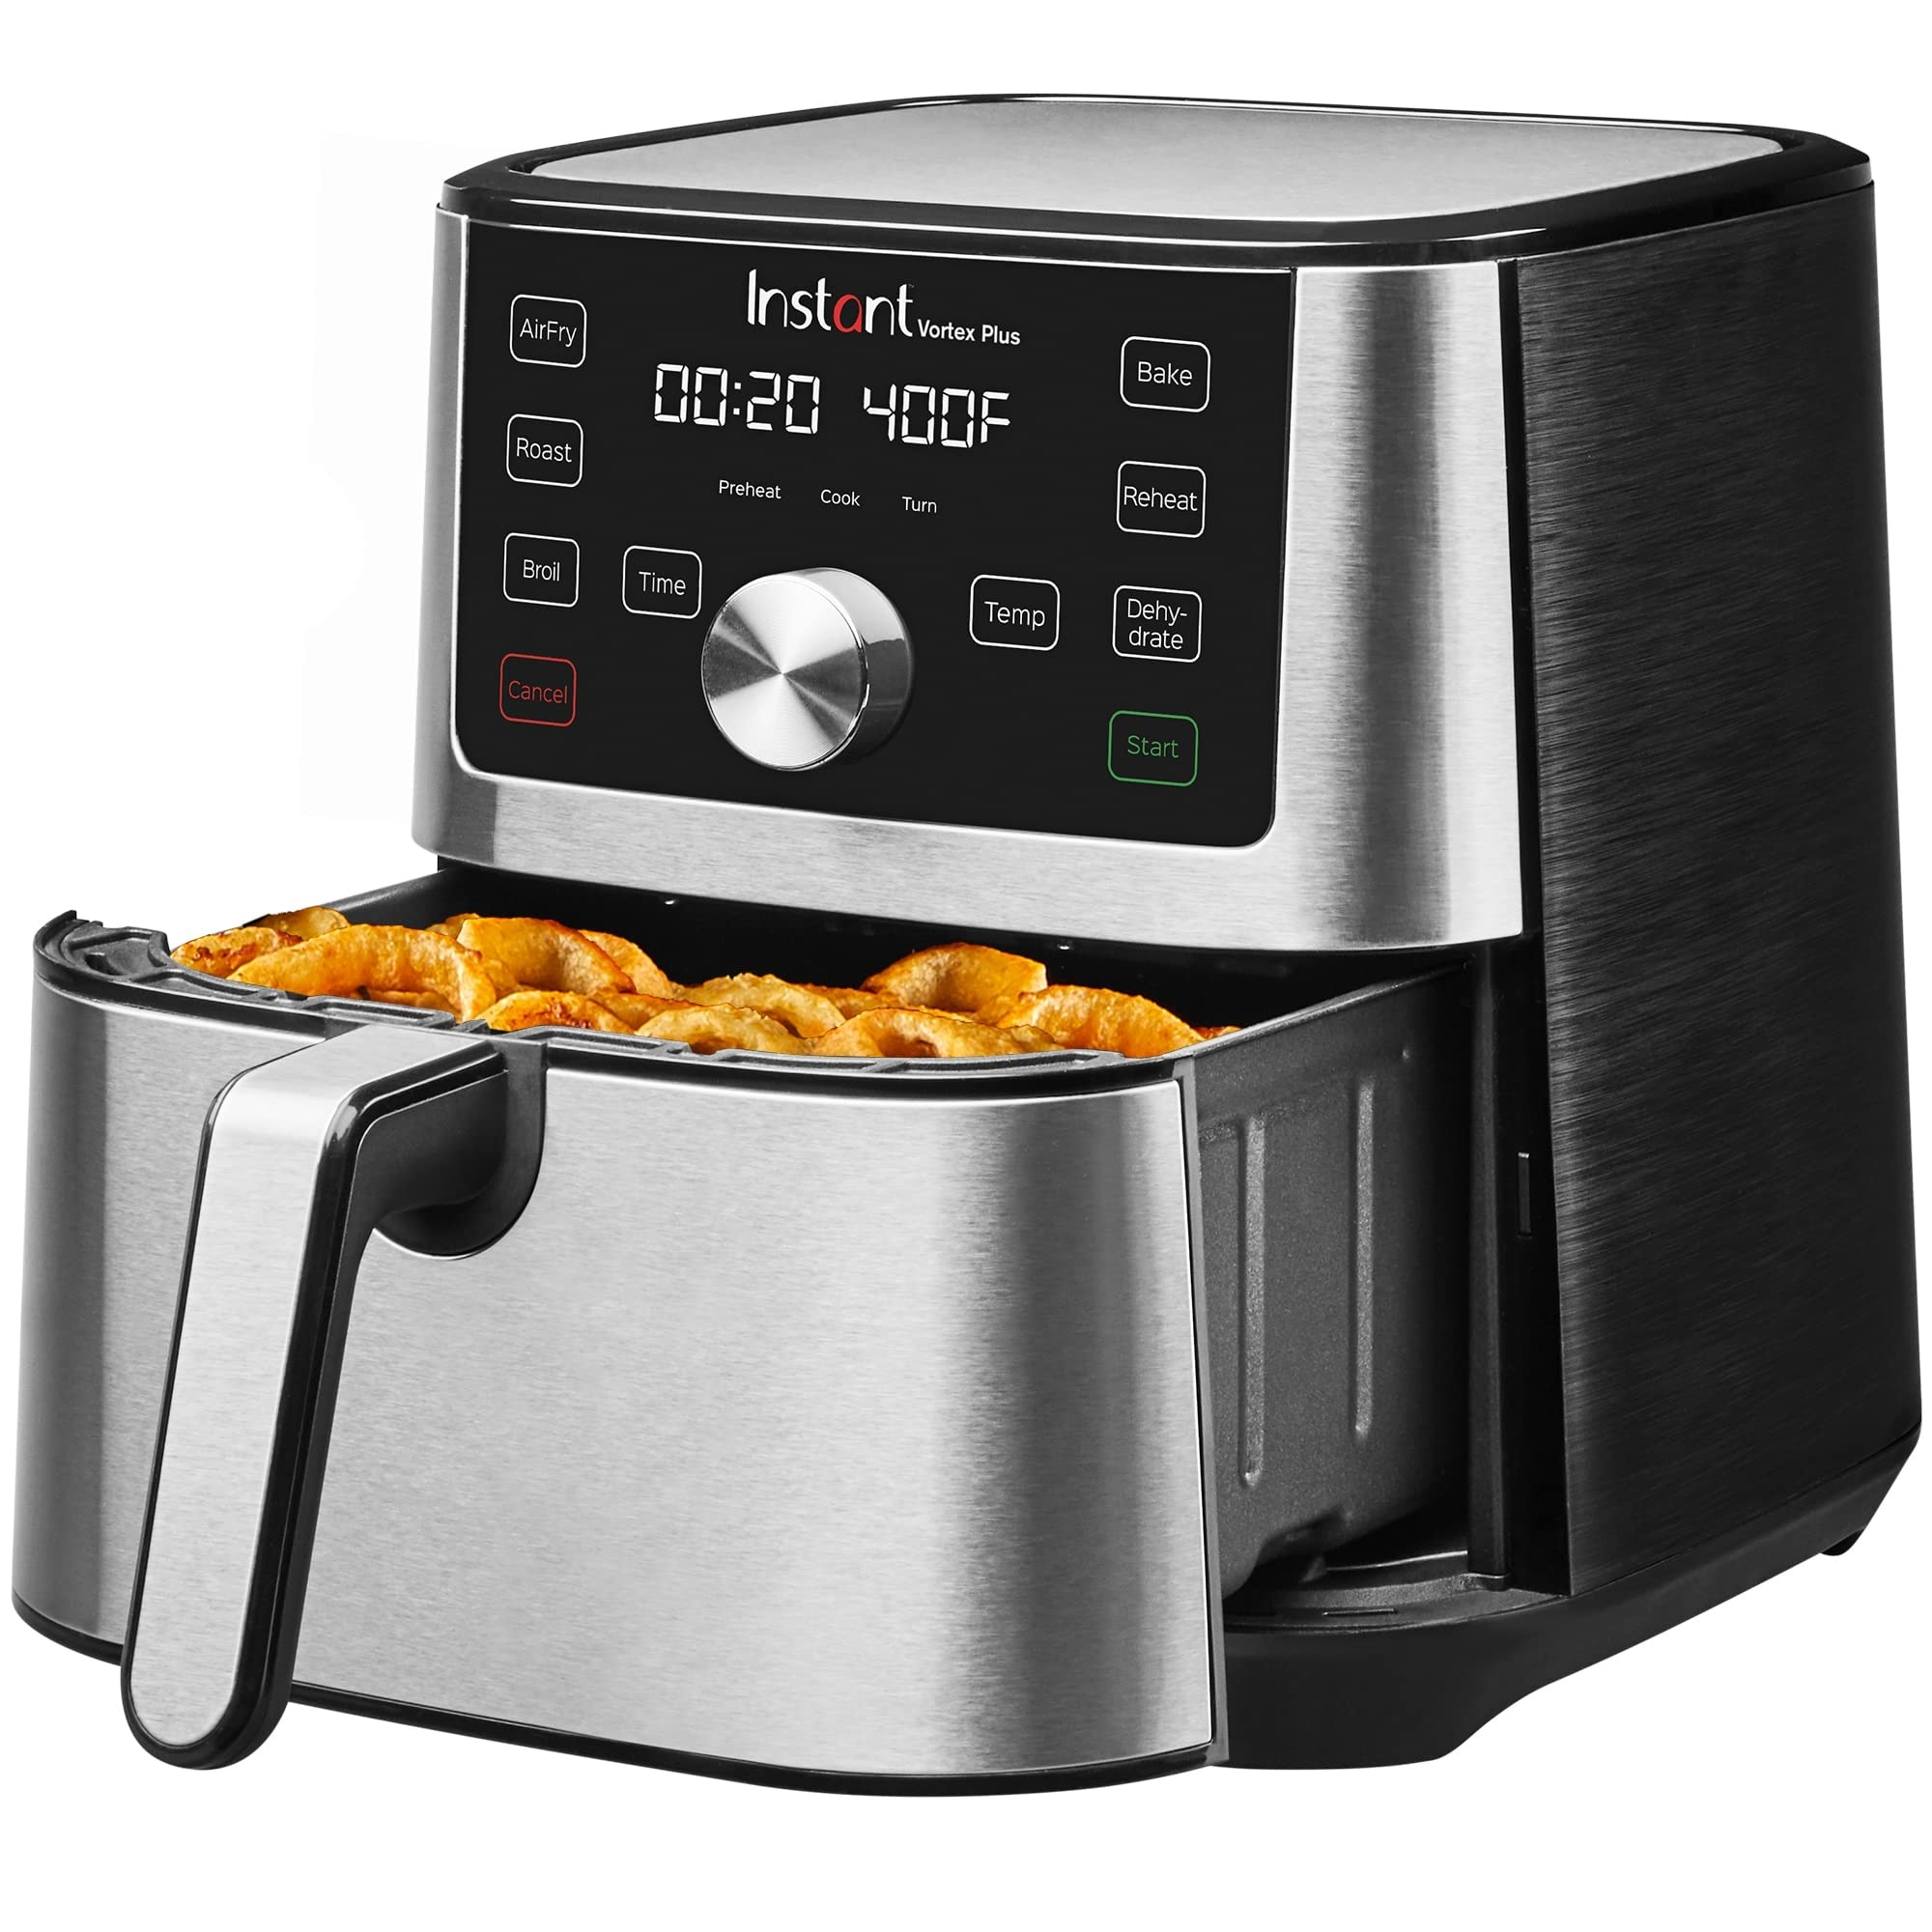 https://ak1.ostkcdn.com/images/products/is/images/direct/ee276845e4314aa618dd36b0e4c294c99cf00c42/Air-Fryer-Oven%2C-6-Quart%2C-From-the-Makers-of-Pot%2C-6-in-1%2C-Broil%2C-Roast%2C-Dehydrate%2C-Bake%2C-Non-stick-and-Dishwasher-Safe-Basket.jpg